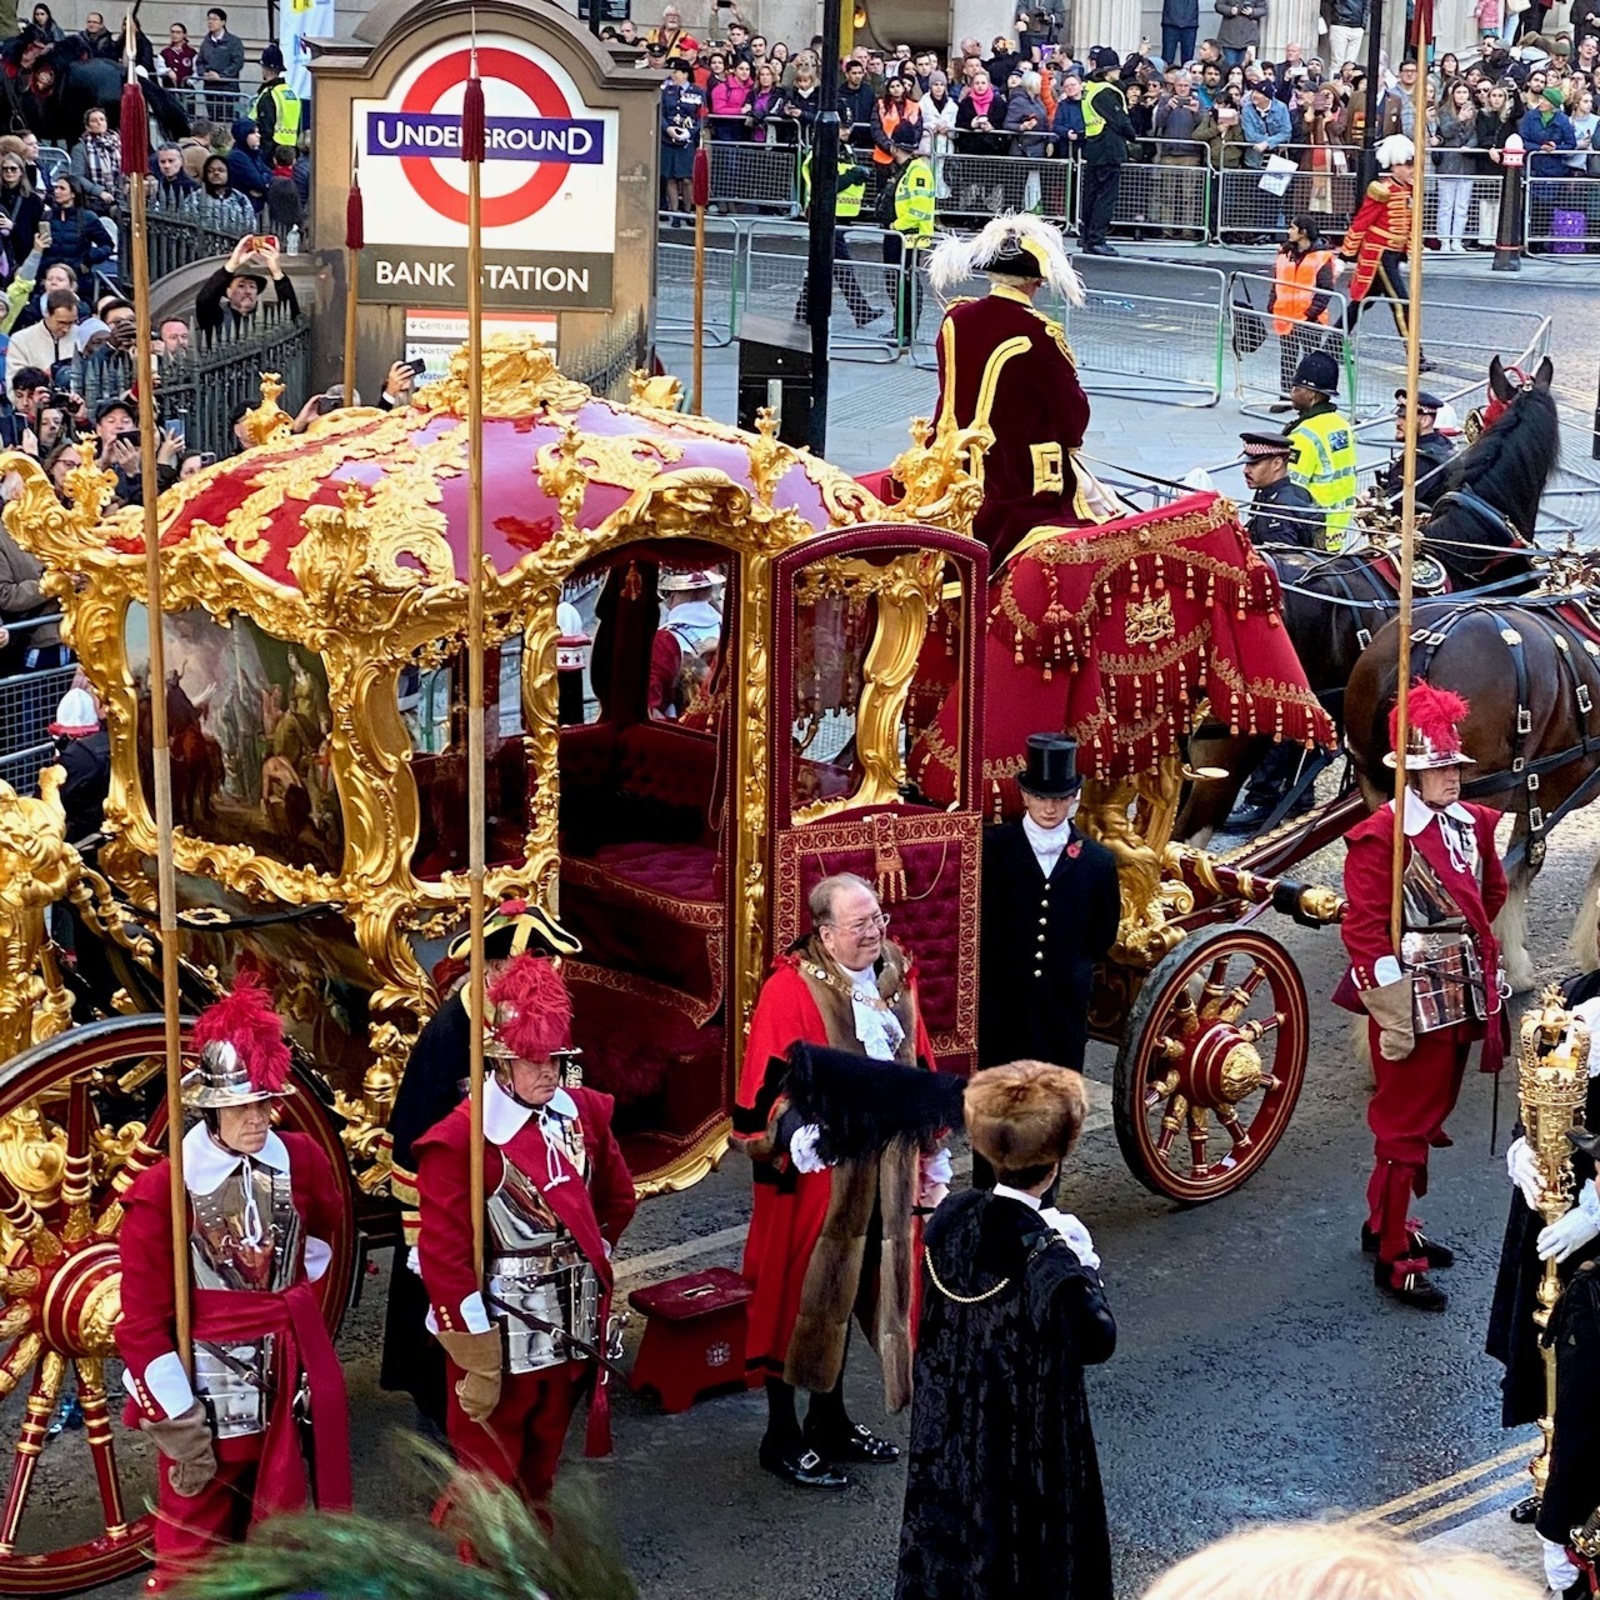 11 November 2023 – Delighted to attend the Lord Mayors Show - The 695th Lord Mayors Show was magnificent!